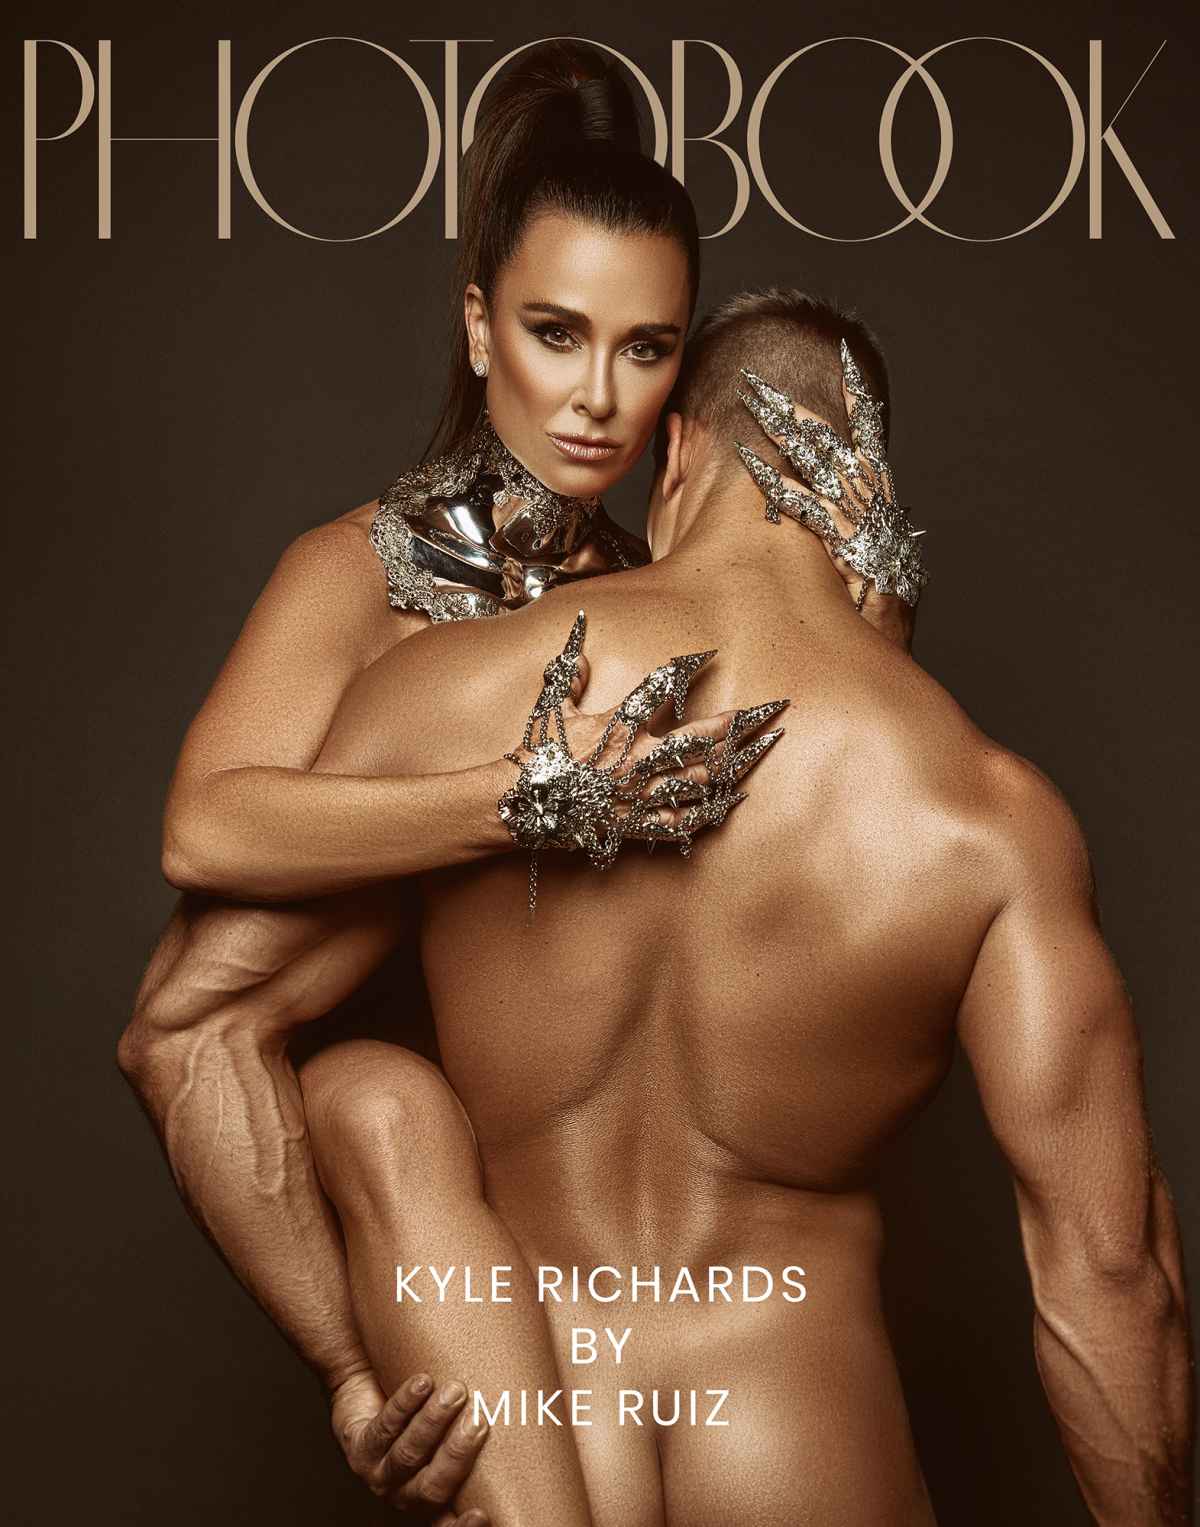 Top Nudist Mom - Kyle Richards Reveals Family Supported Sexy Photo Shoot: Pics